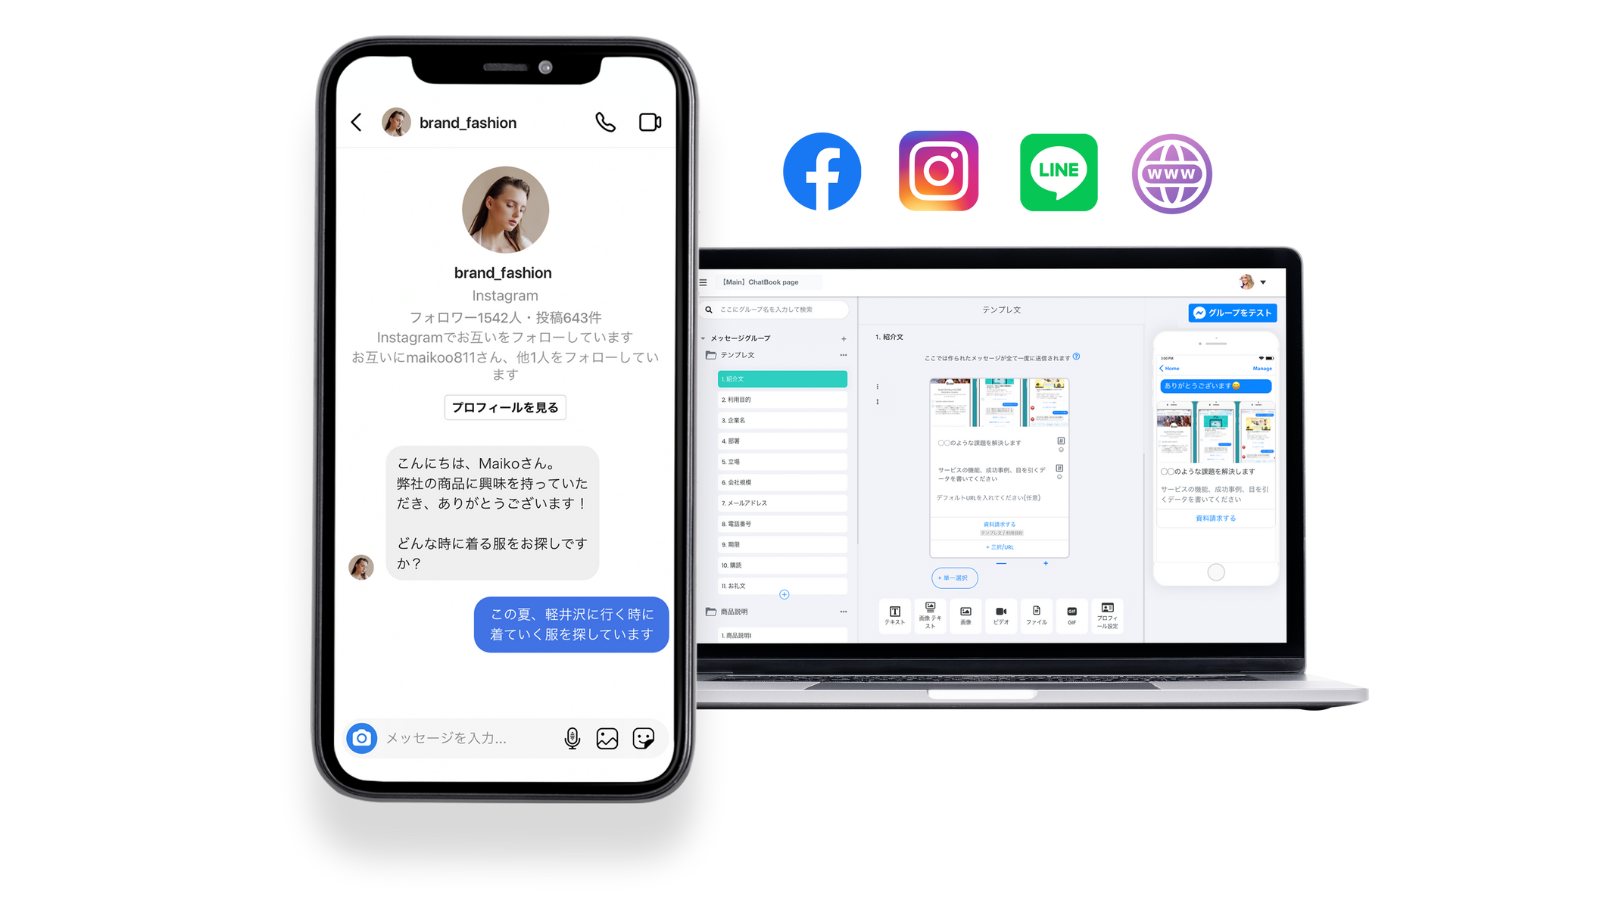 Unified inbox with popular social media in Japan.